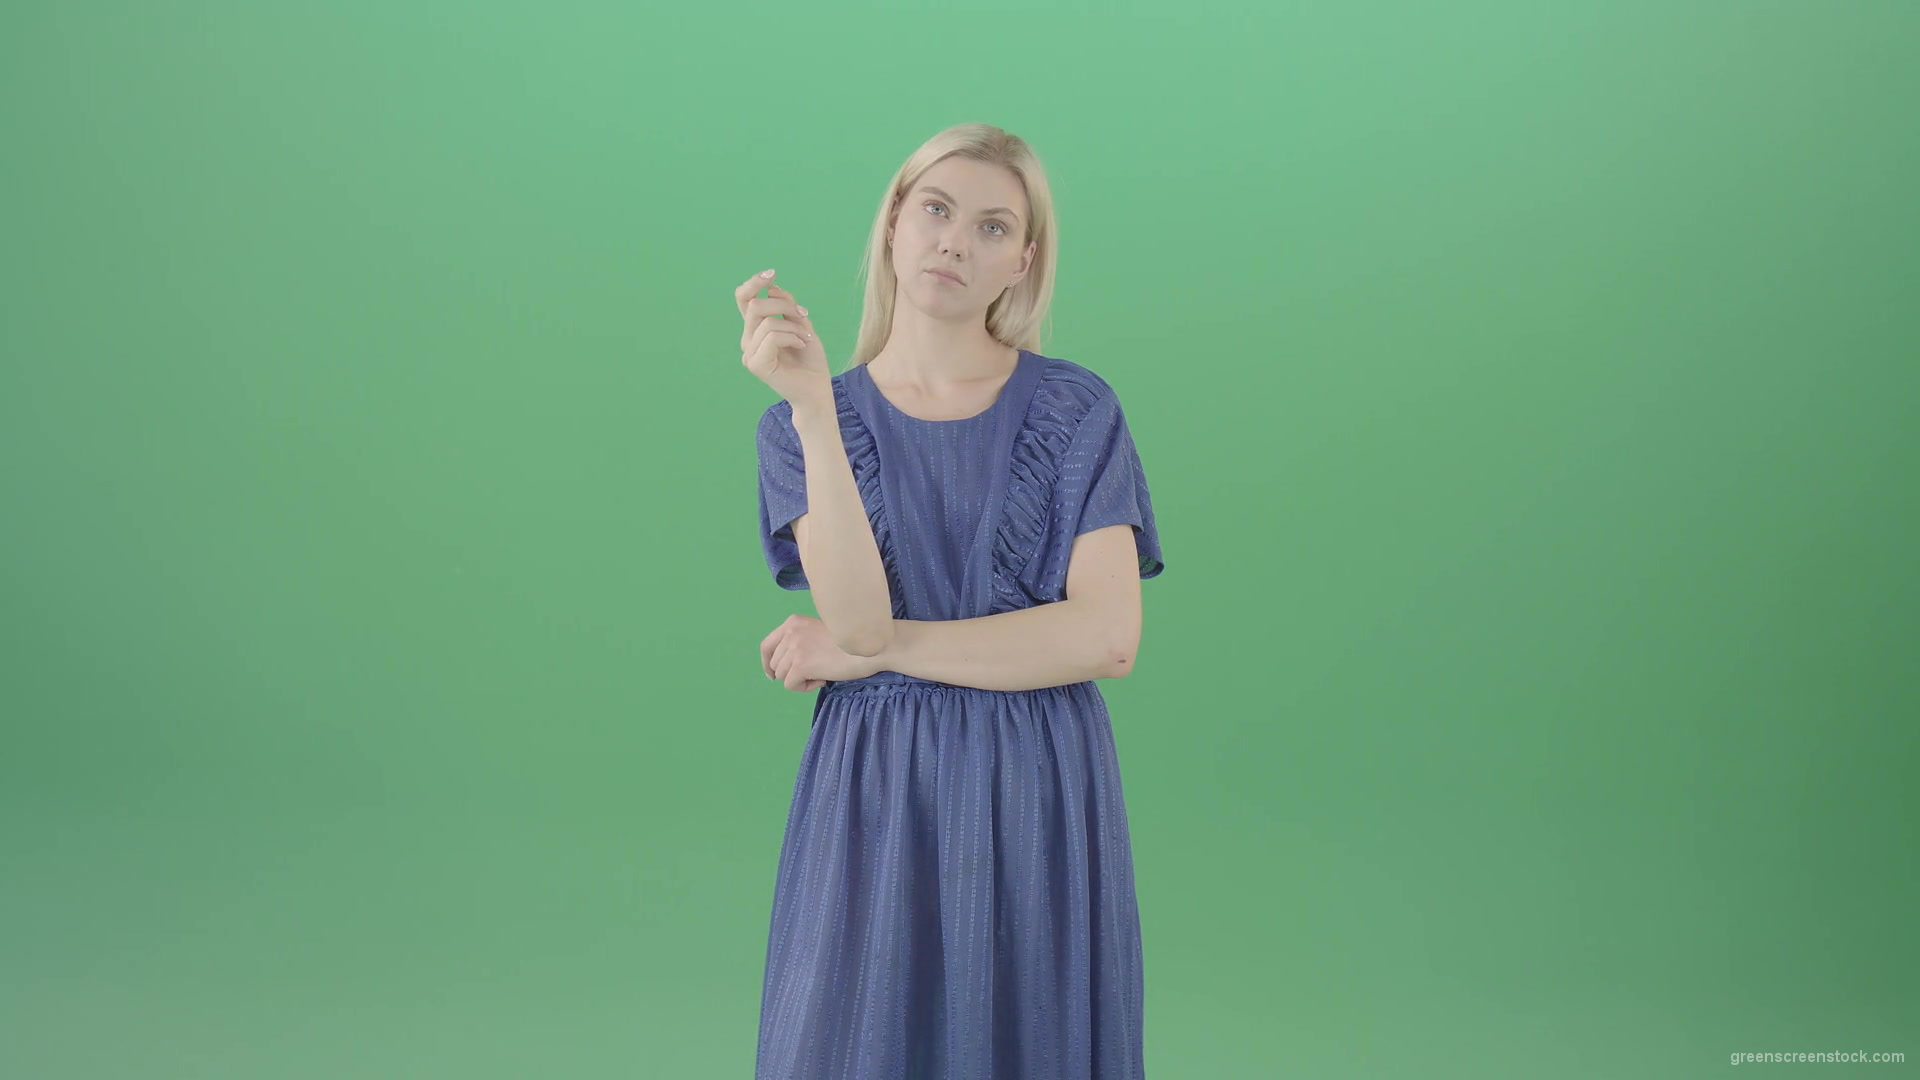 Boring-blonde-girl-in-blue-costume-can-not-find-virtual-products-on-touch-screen-isolated-on-green-background-4K-Video-Footage--1920_007 Green Screen Stock